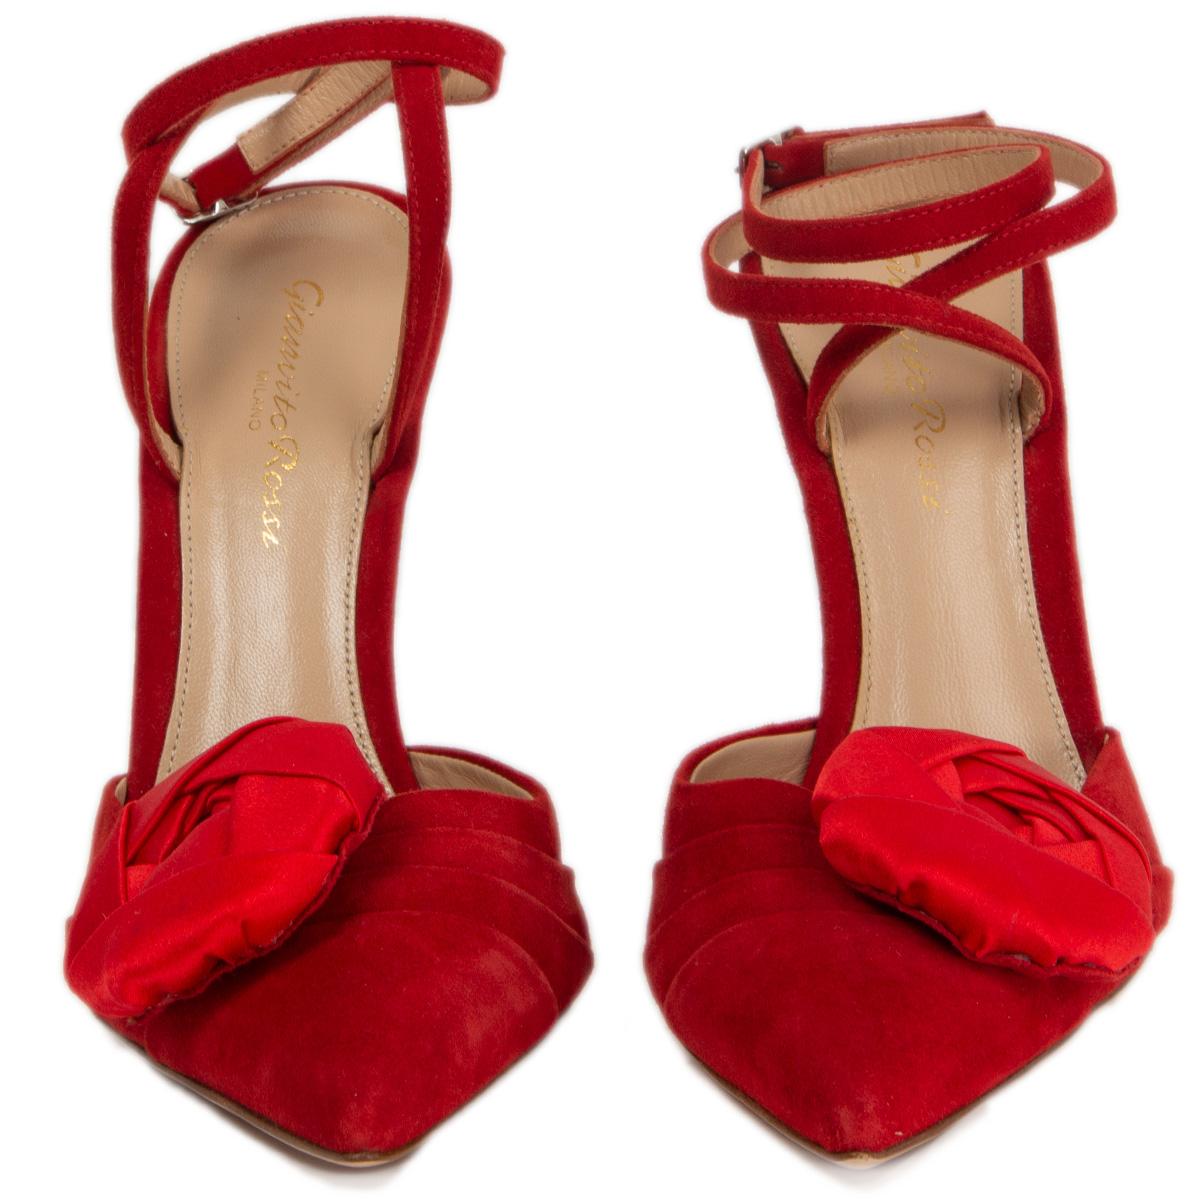 100% authentic Gianvito Rossi pointed-toe ankle-strap pumps in red suede embellished with a red satin rose. Buckle closure around the ankle. Brand new. 

Measurements
Imprinted Size	37
Shoe Size	37
Inside Sole	24cm (9.4in)
Width	7.5cm